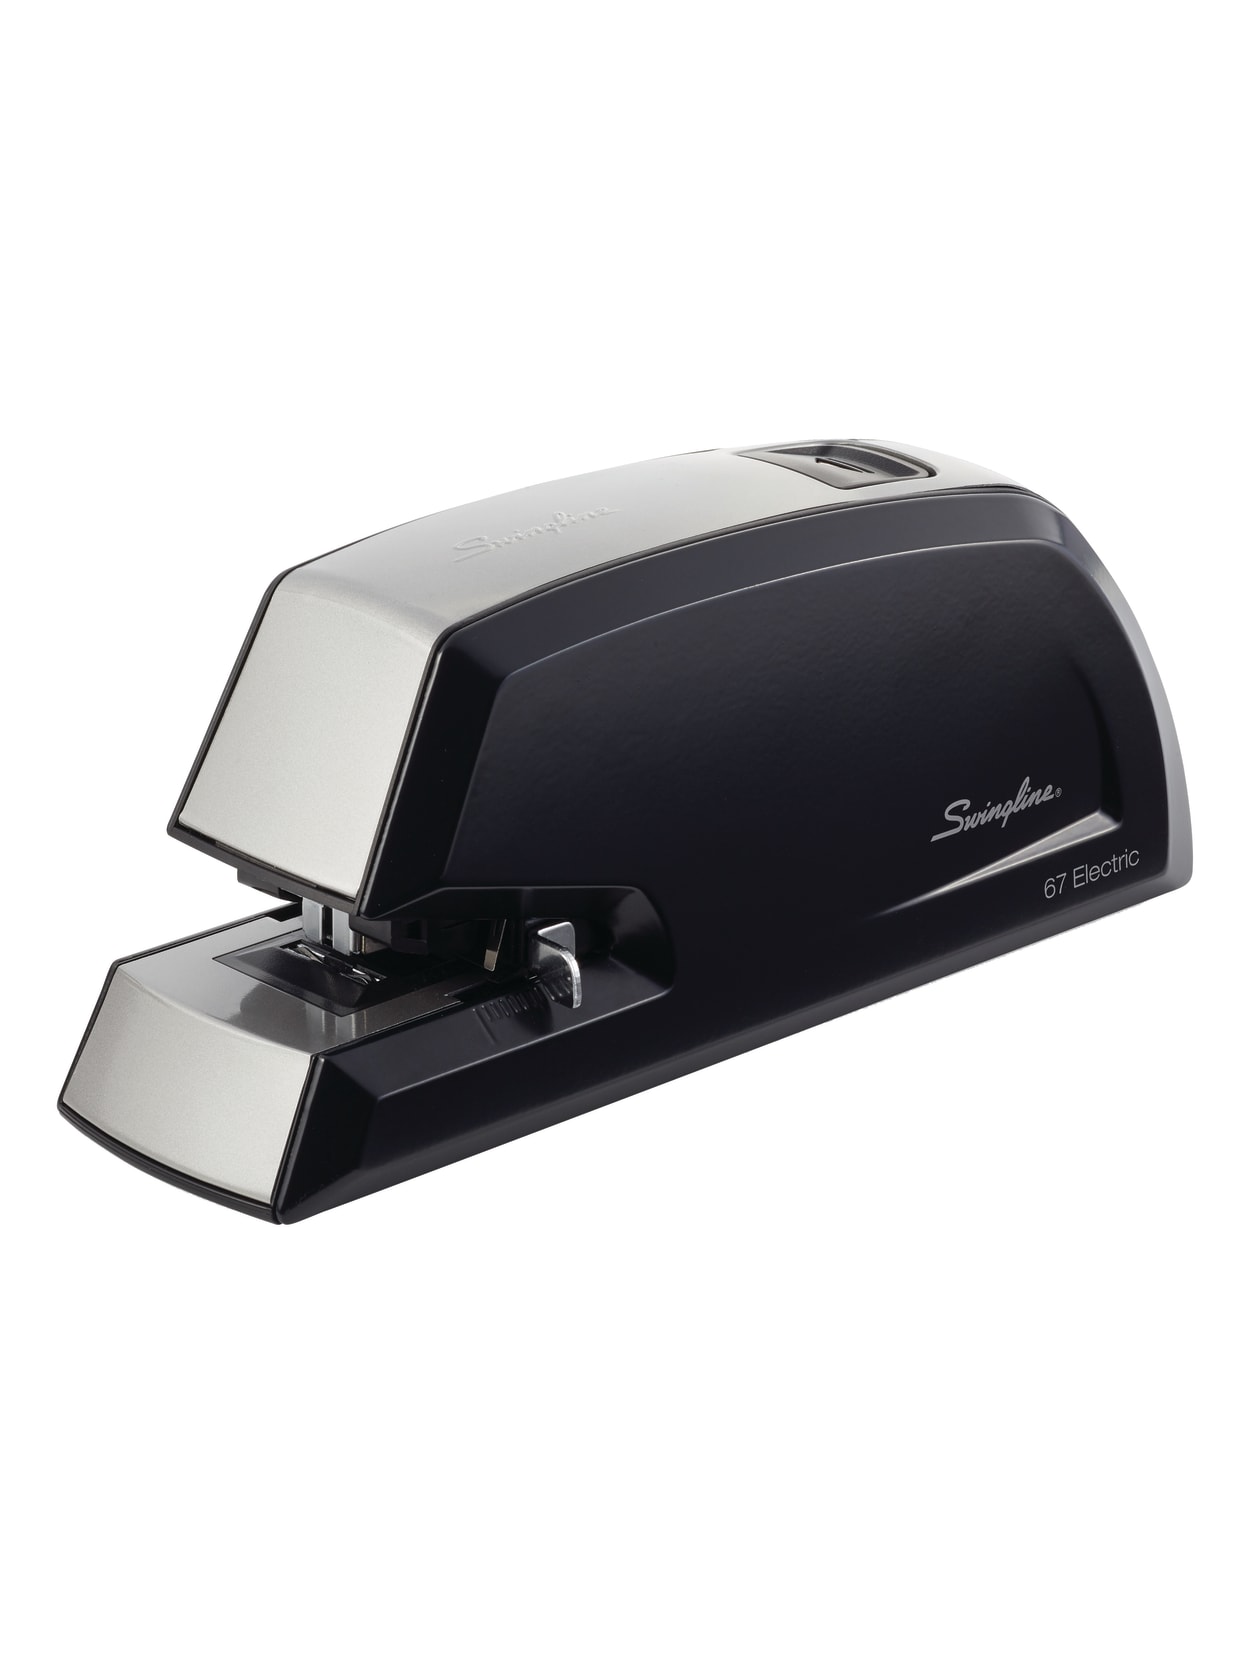 cost of electric stapler